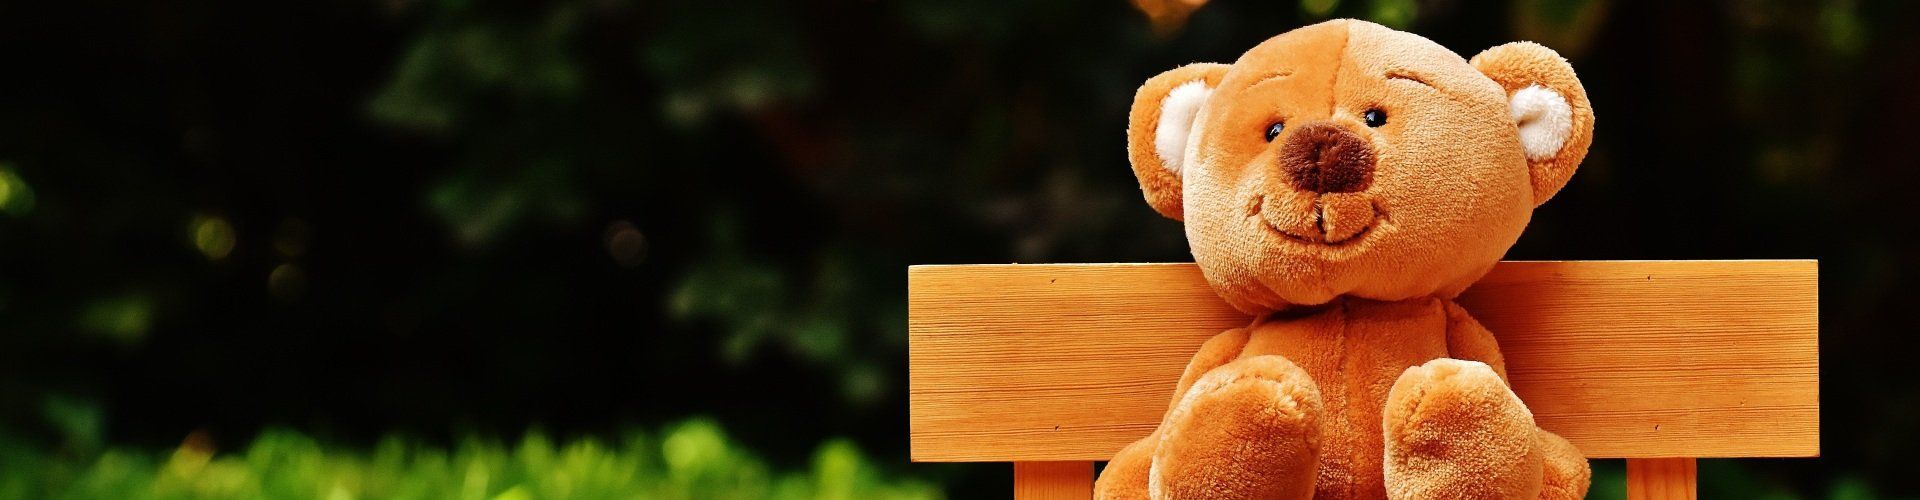 a brown teddy bear is sitting on a wooden bench .